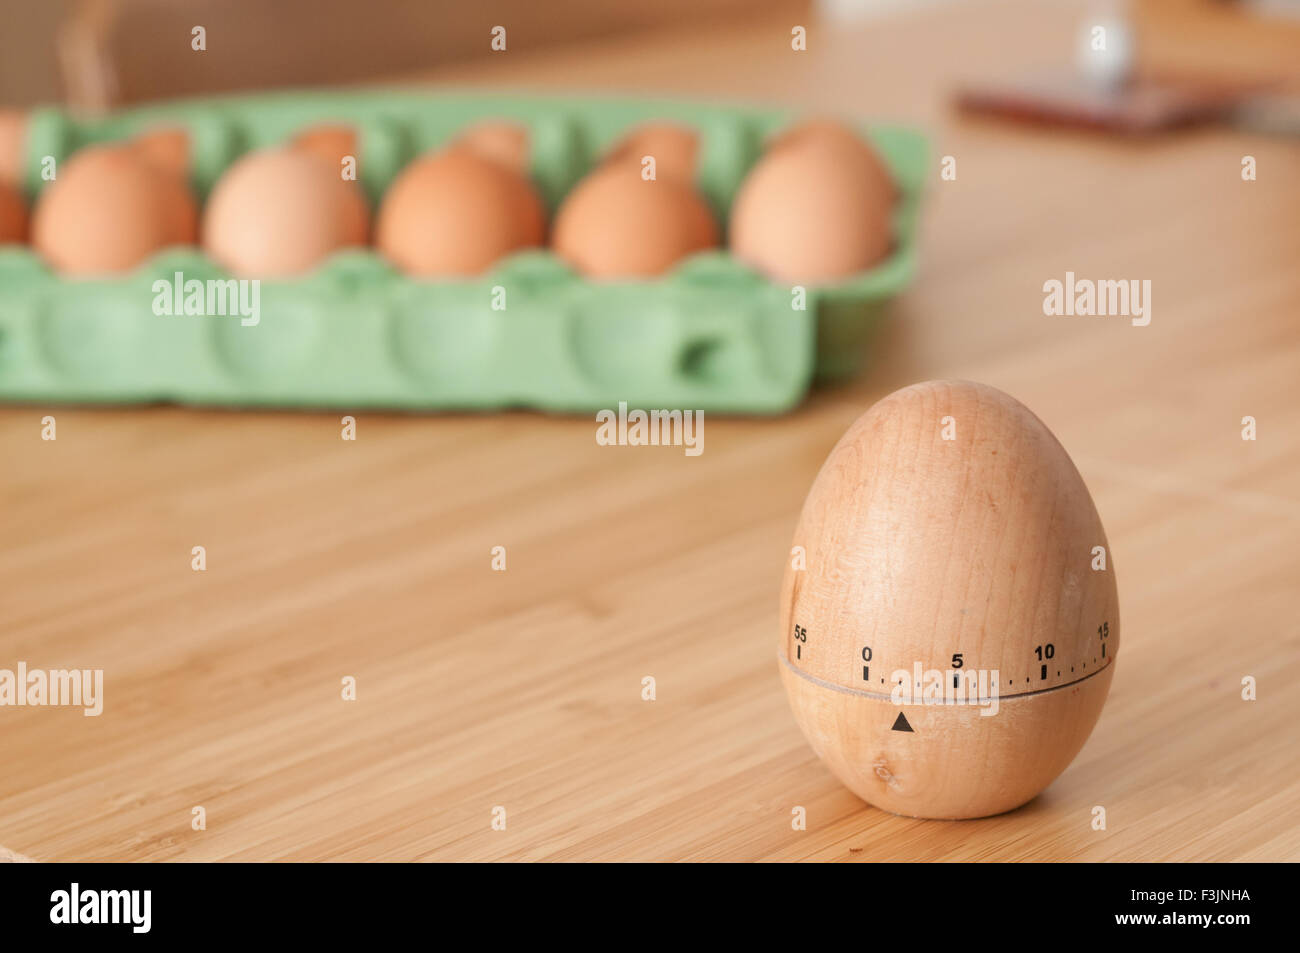 Egg timer with a carton of fresh eggs in the background Stock Photo